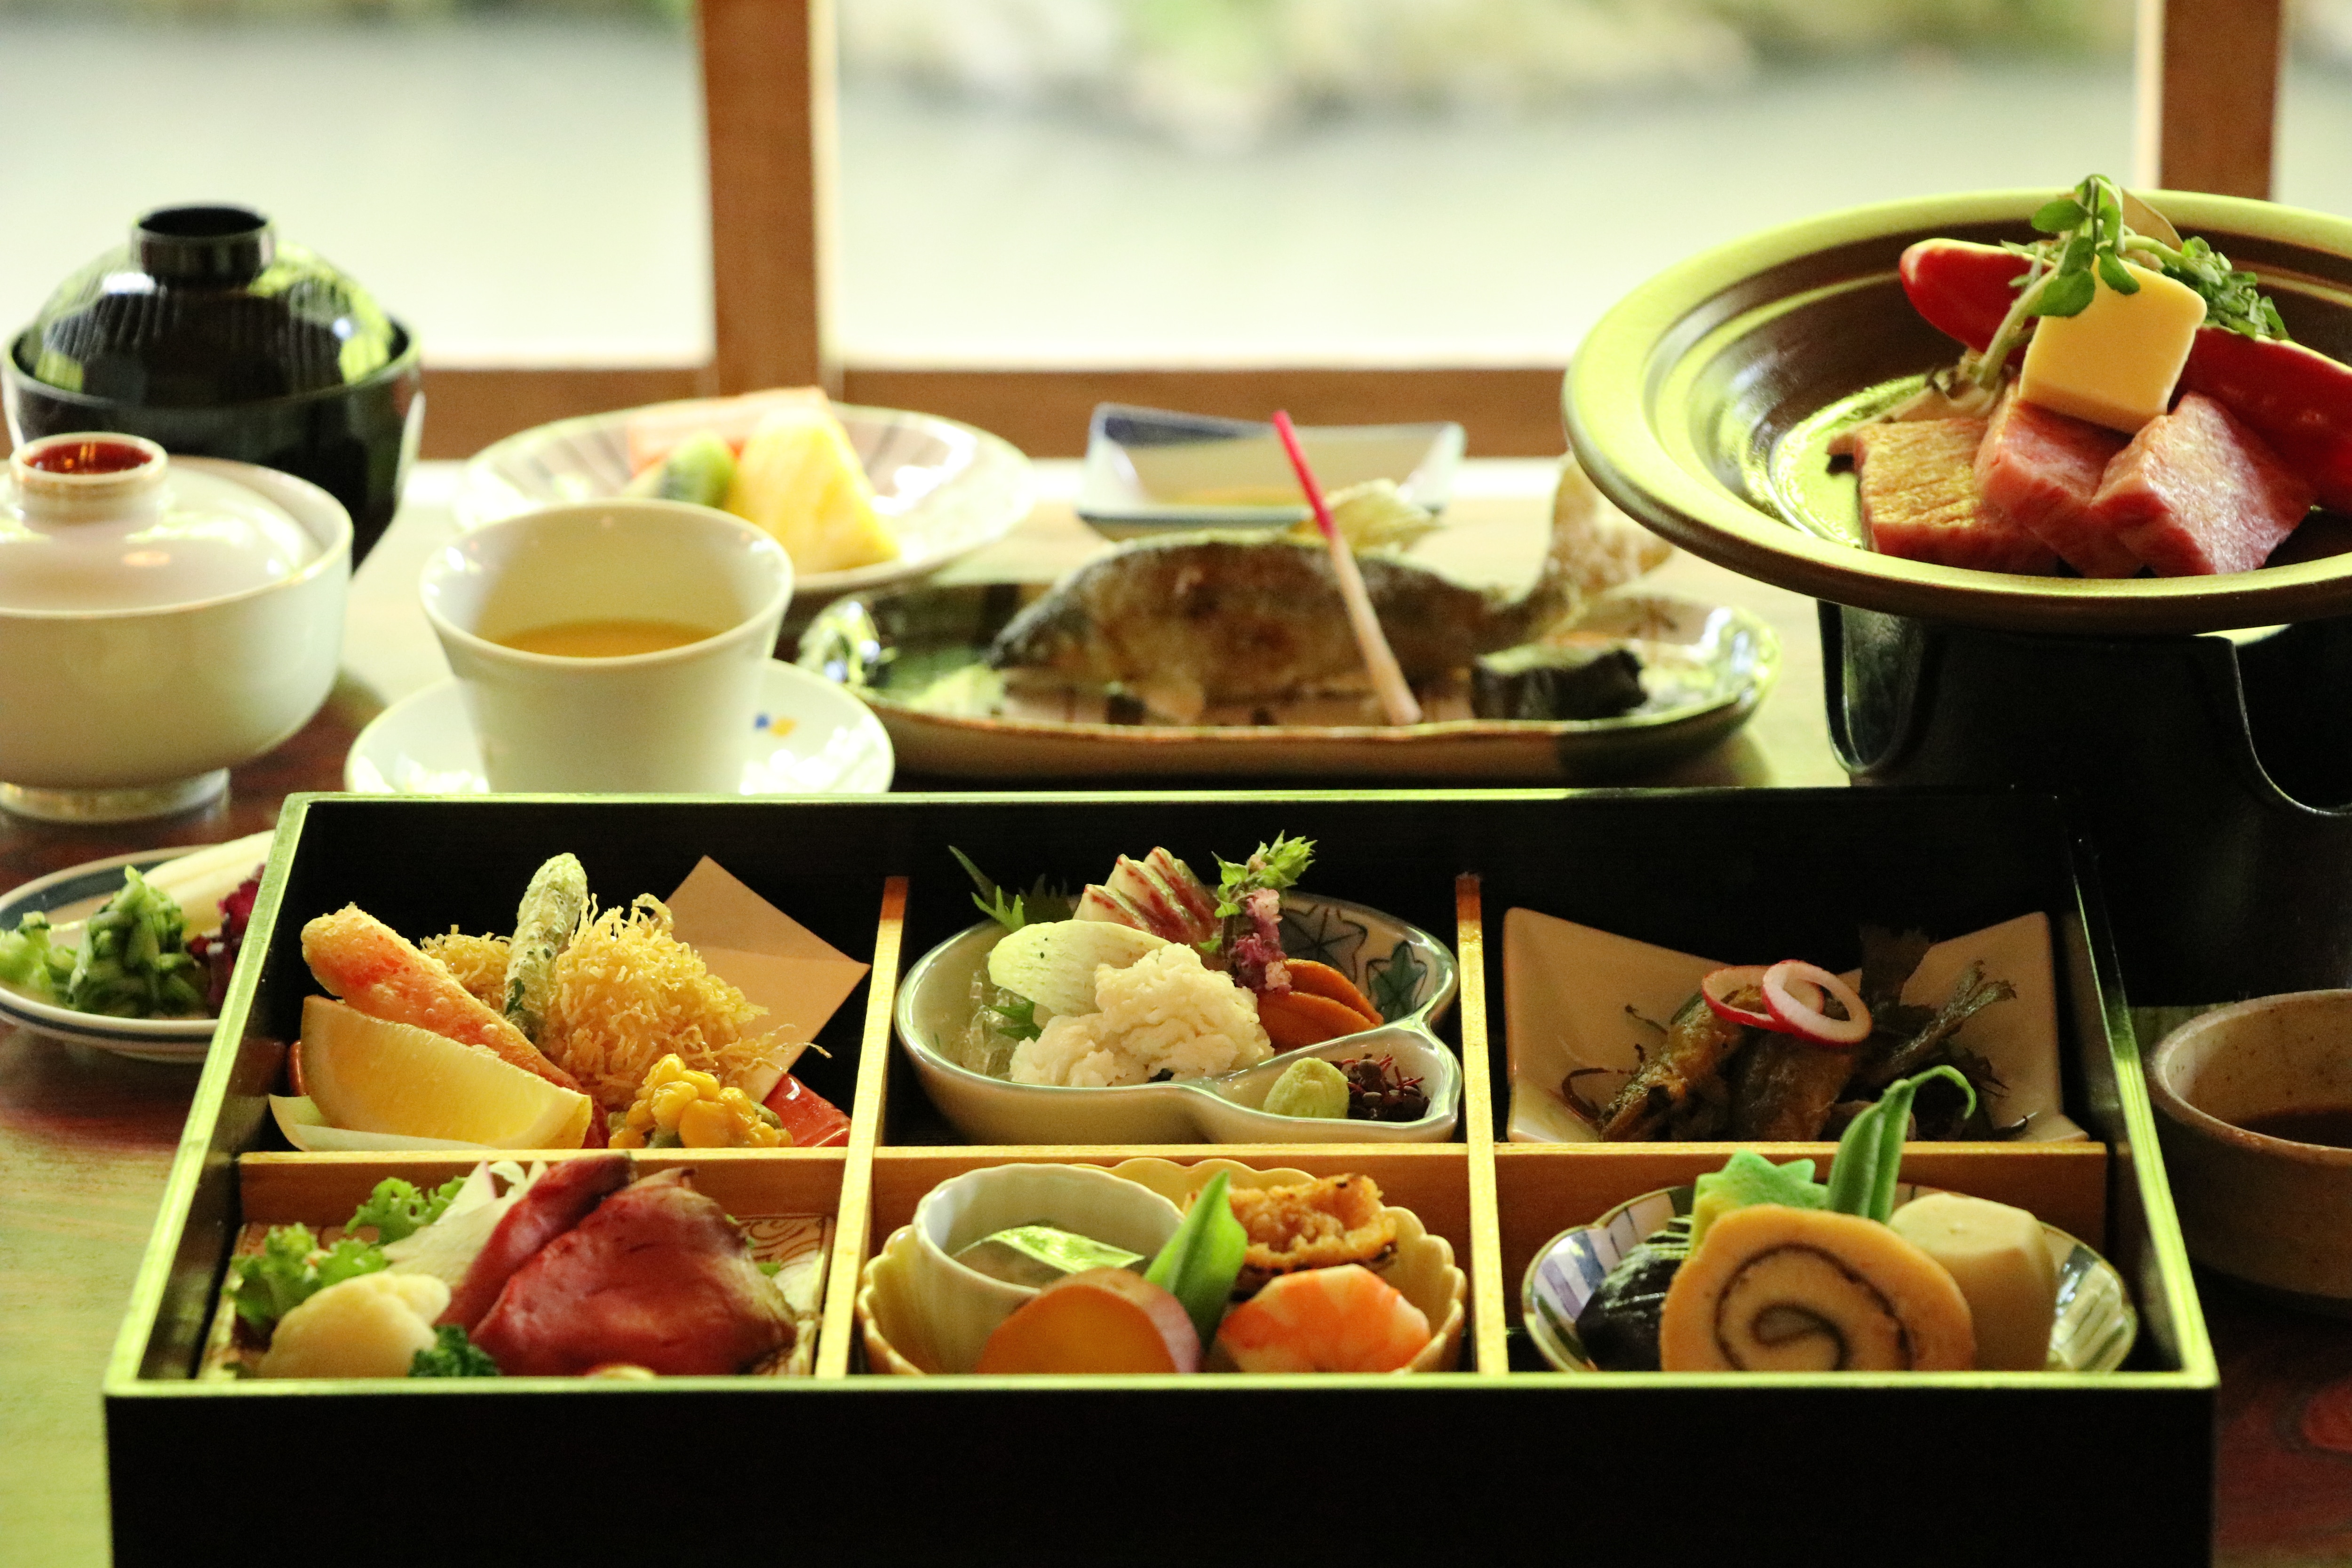 [Kawadoko] Kaiseki cuisine * Provided with a reduced number of servings as a measure against corona